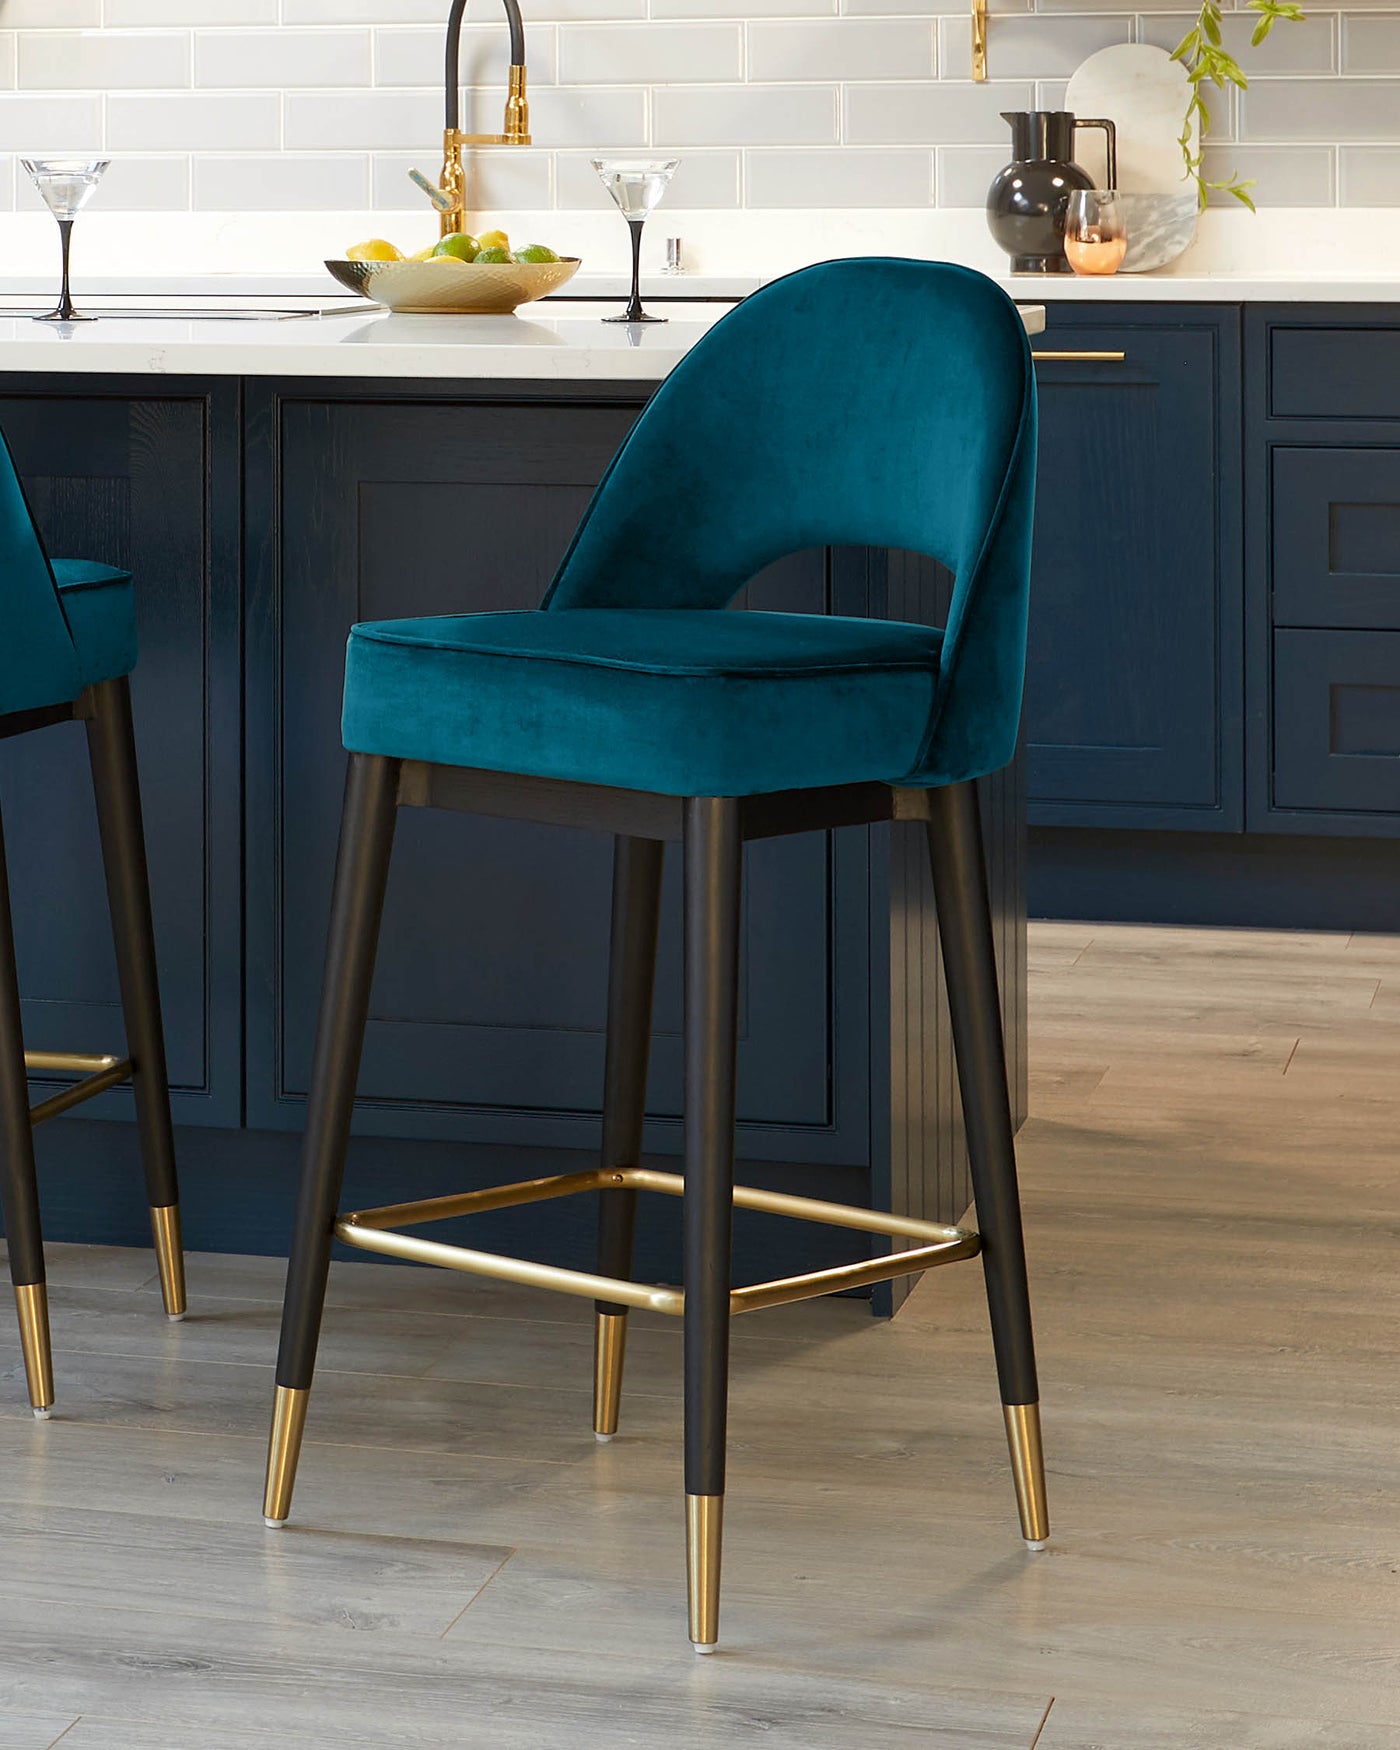 Elegant modern bar stool with plush teal velvet upholstery and a curved backrest, supported by a sleek black metal frame with gold accents on the legs and footrest.